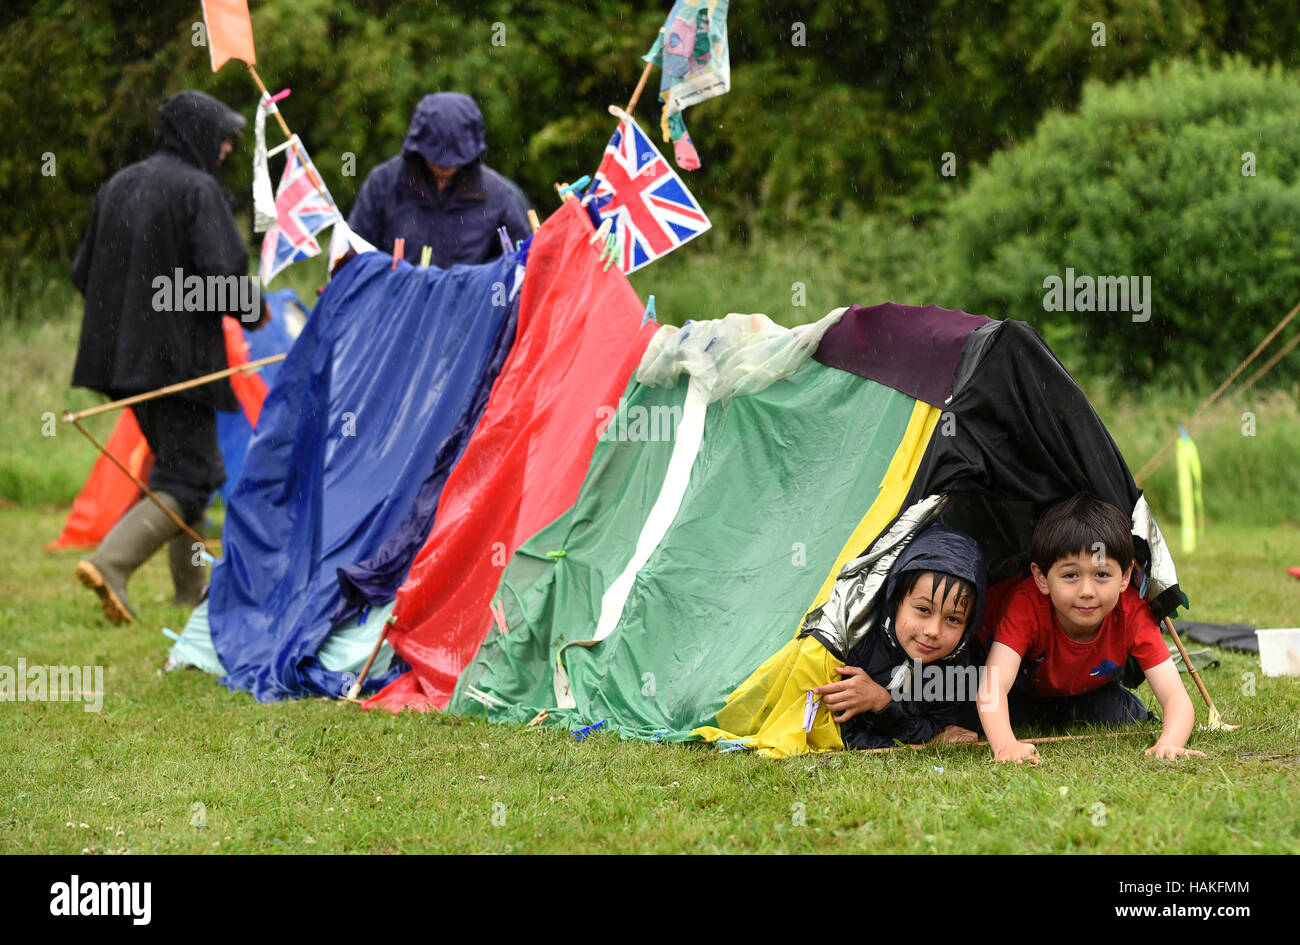 Children camping in home made tent at a wet rainy summer fete Uk Stock Photo